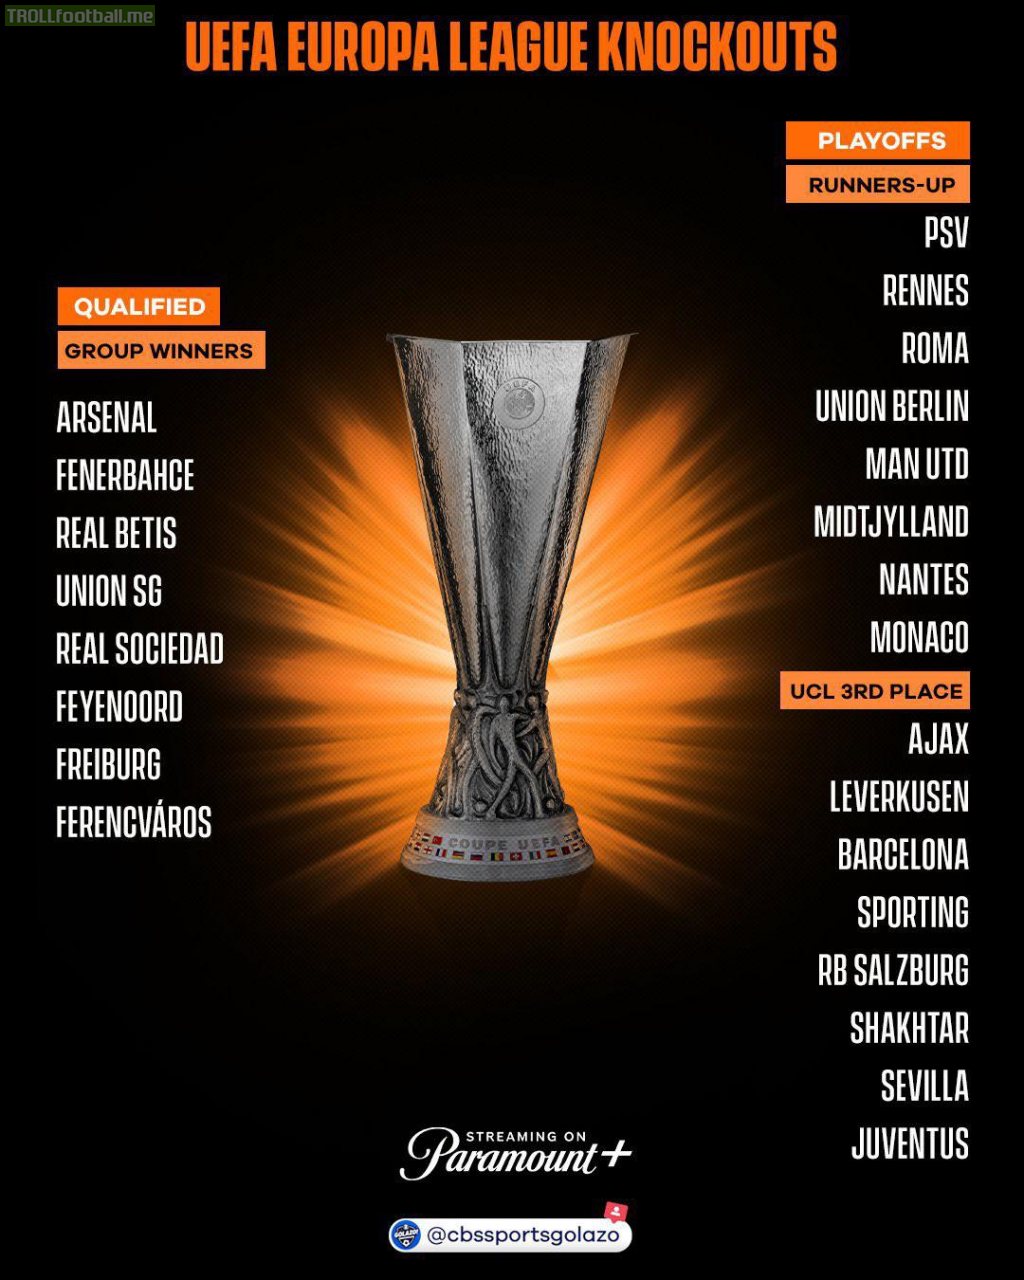 The full list of group winners, as well as the runners-up, who will face Champions League third-placed teams in a play-off round in February. [CBSSportsGolazo]